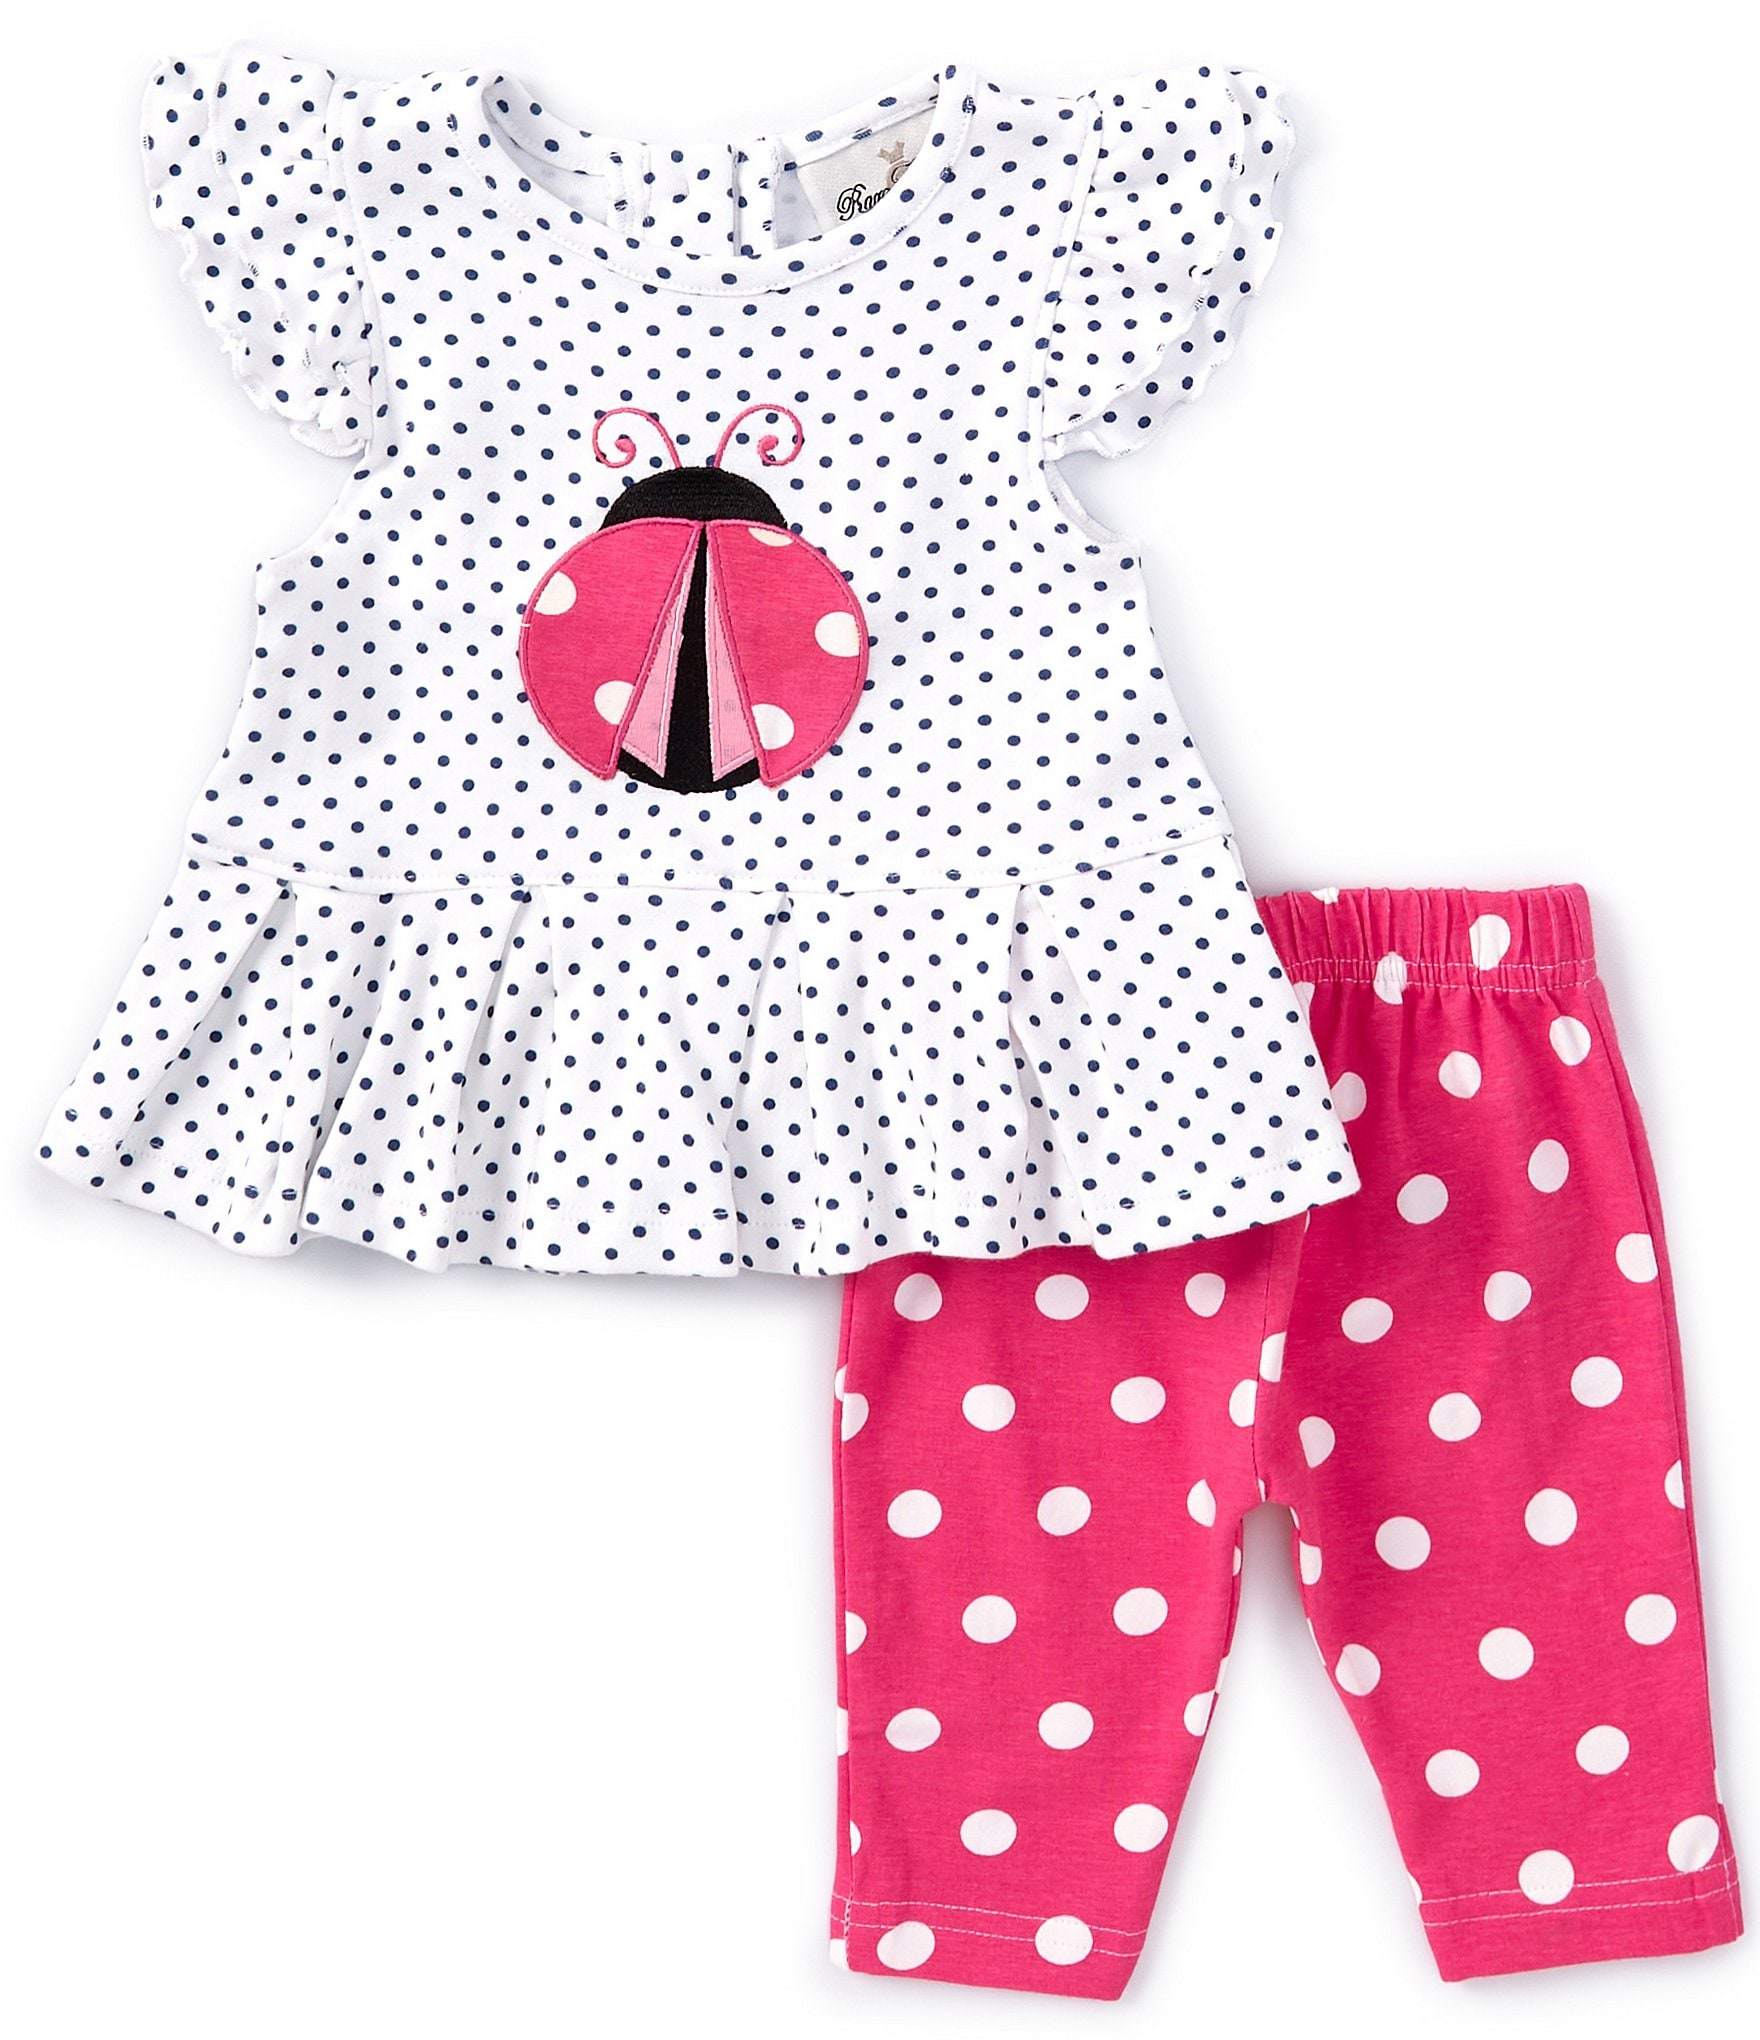 https://dimg.dillards.com/is/image/DillardsZoom/zoom/rare-editions-baby-girls-3-24-months-flutter-sleeve-pin-dotted-ladybug-applique-tunic-top--polka-dot-leggings-set/00000000_zi_e10f5ae2-9c47-435a-b83d-bea737dc974f.jpg